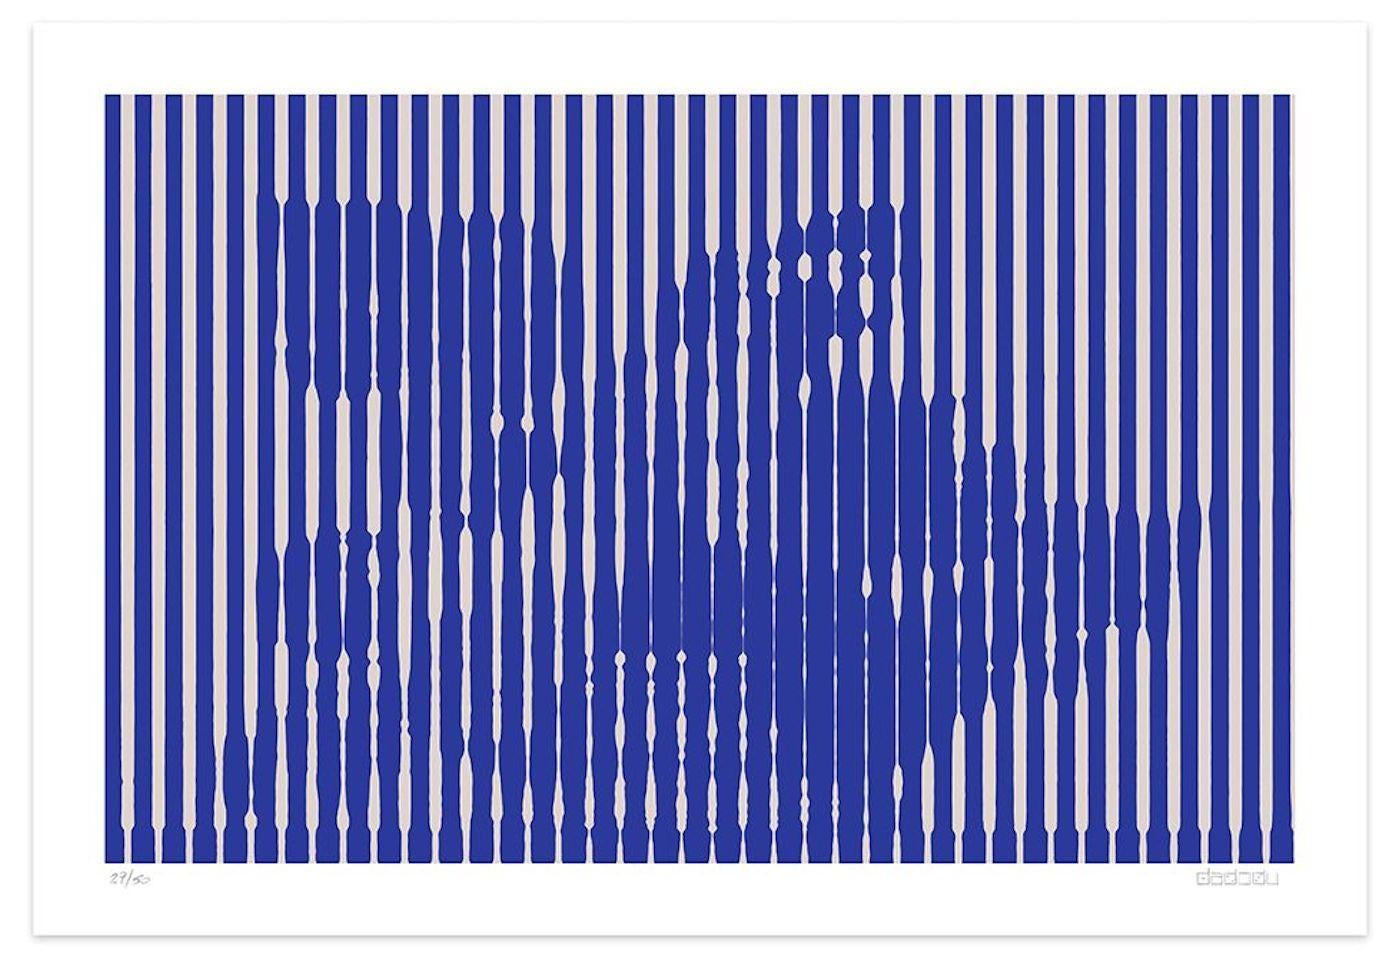 Image dimensions: 60 x 92.9 cm.

Grey Lines is an outstanding giclée print realized by the contemporary artist Dadodu in 2016.

This original artwork represents a still life with vertical grey lines on a blue background.

Hand-signed on the lower